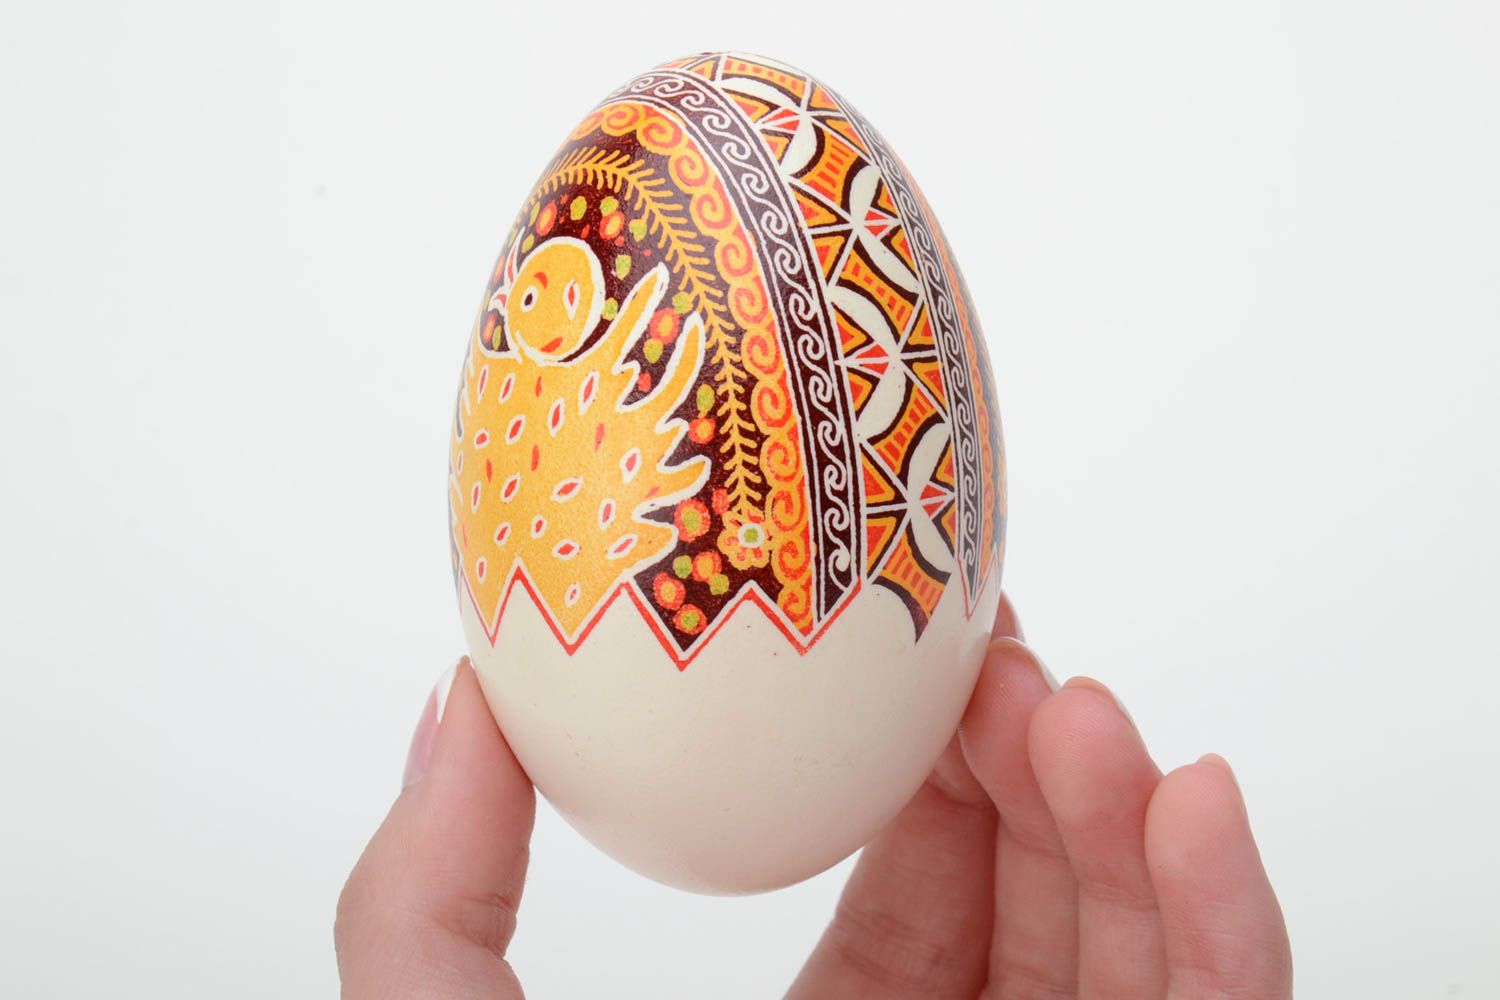 Handmade designer Easter egg painted with aniline dyes using waxing technique photo 5